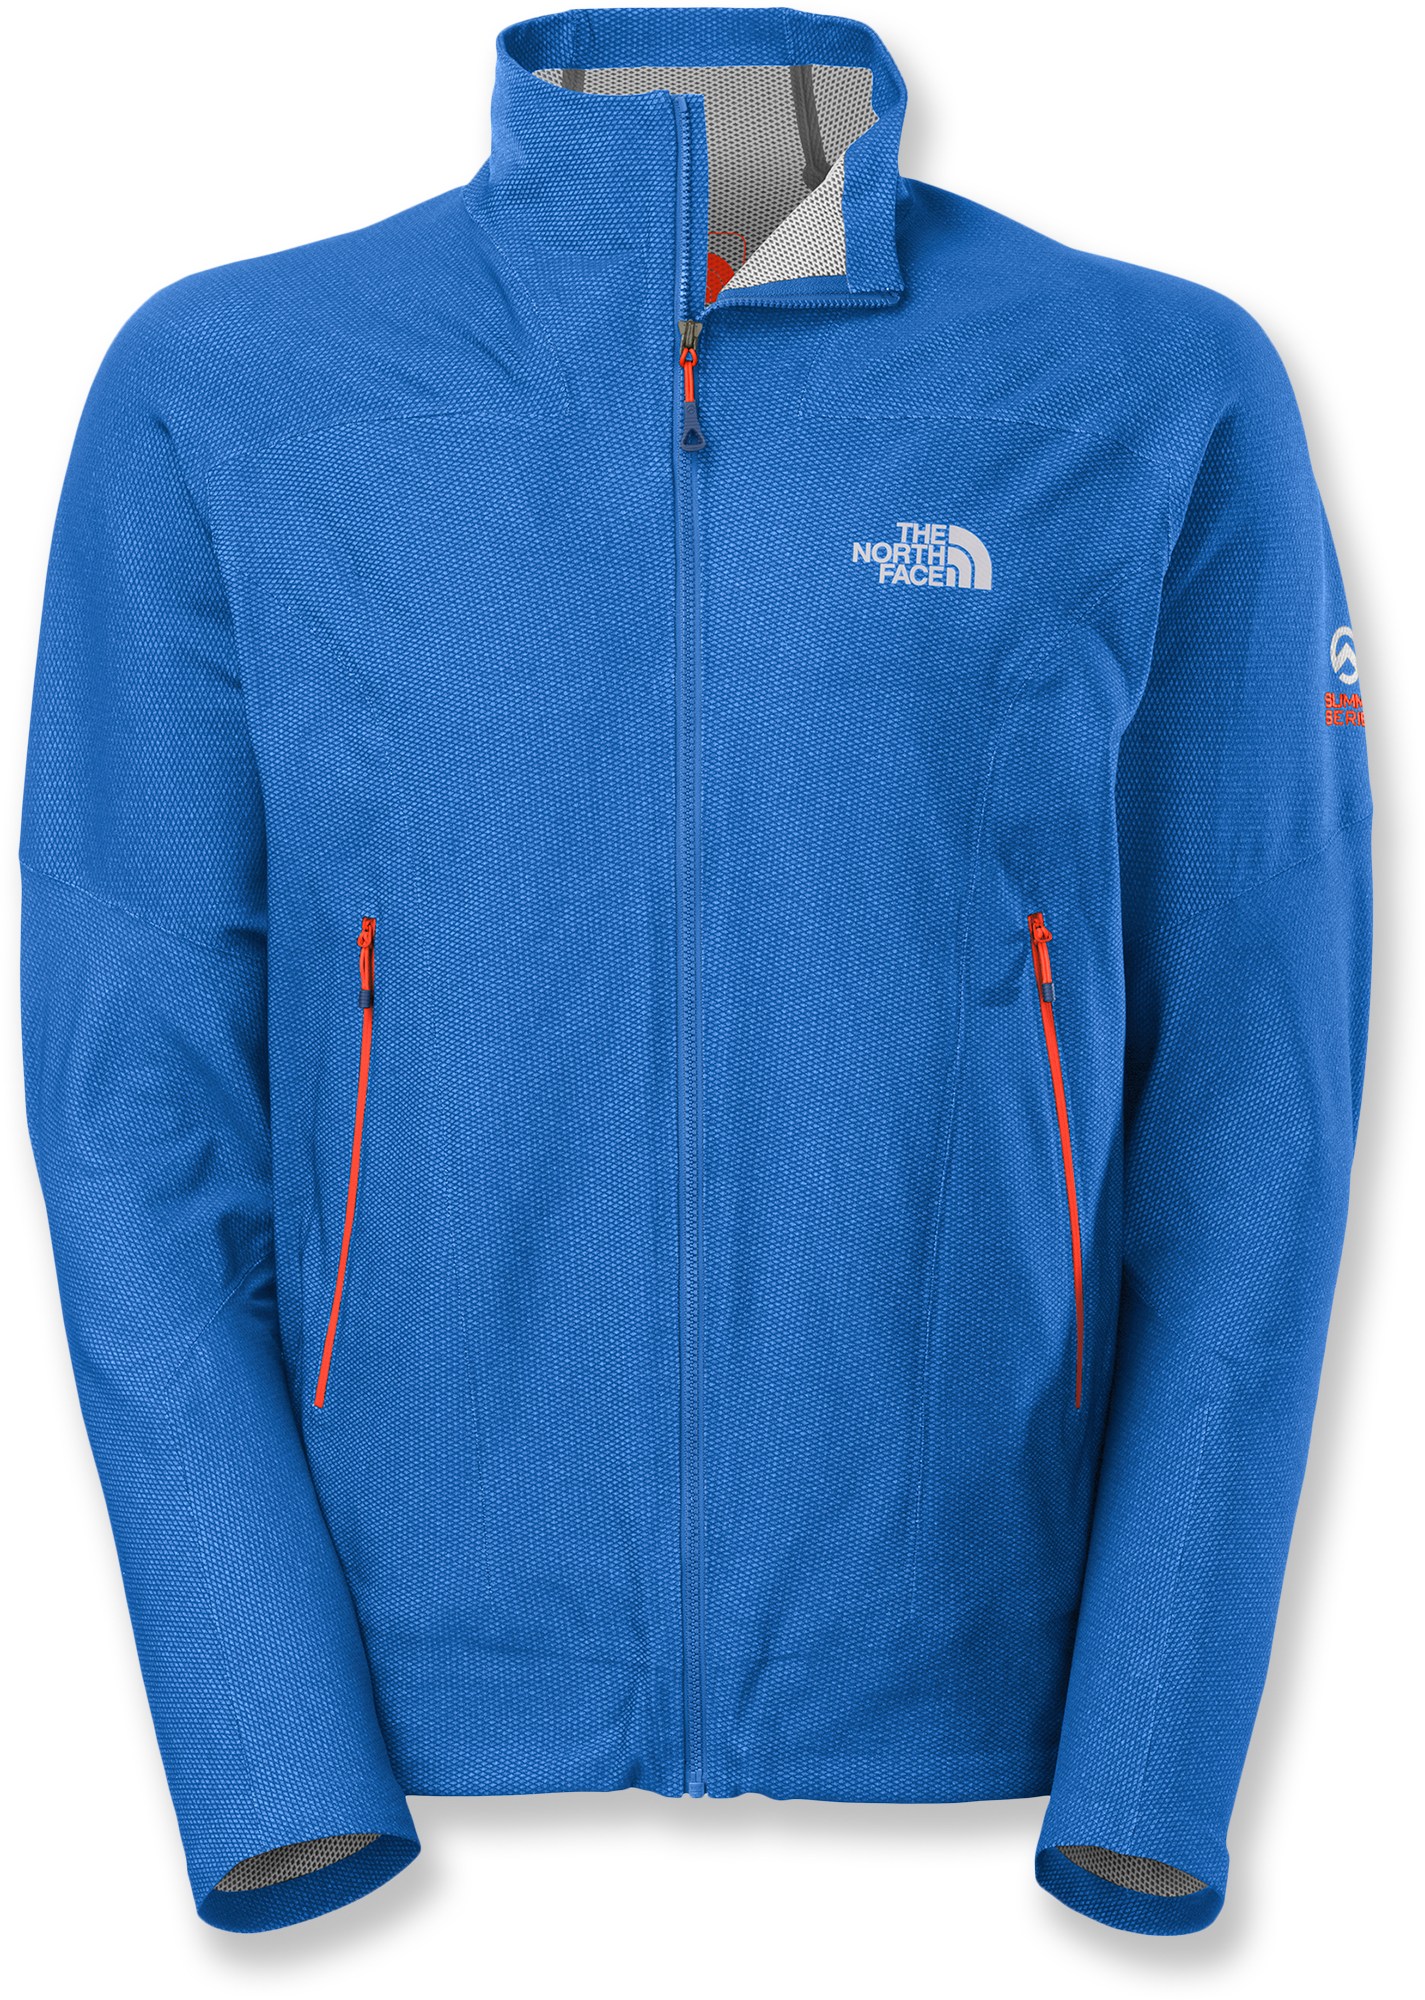 The North Face Exodus Jacket - Glacier National Park Travel Guide: An